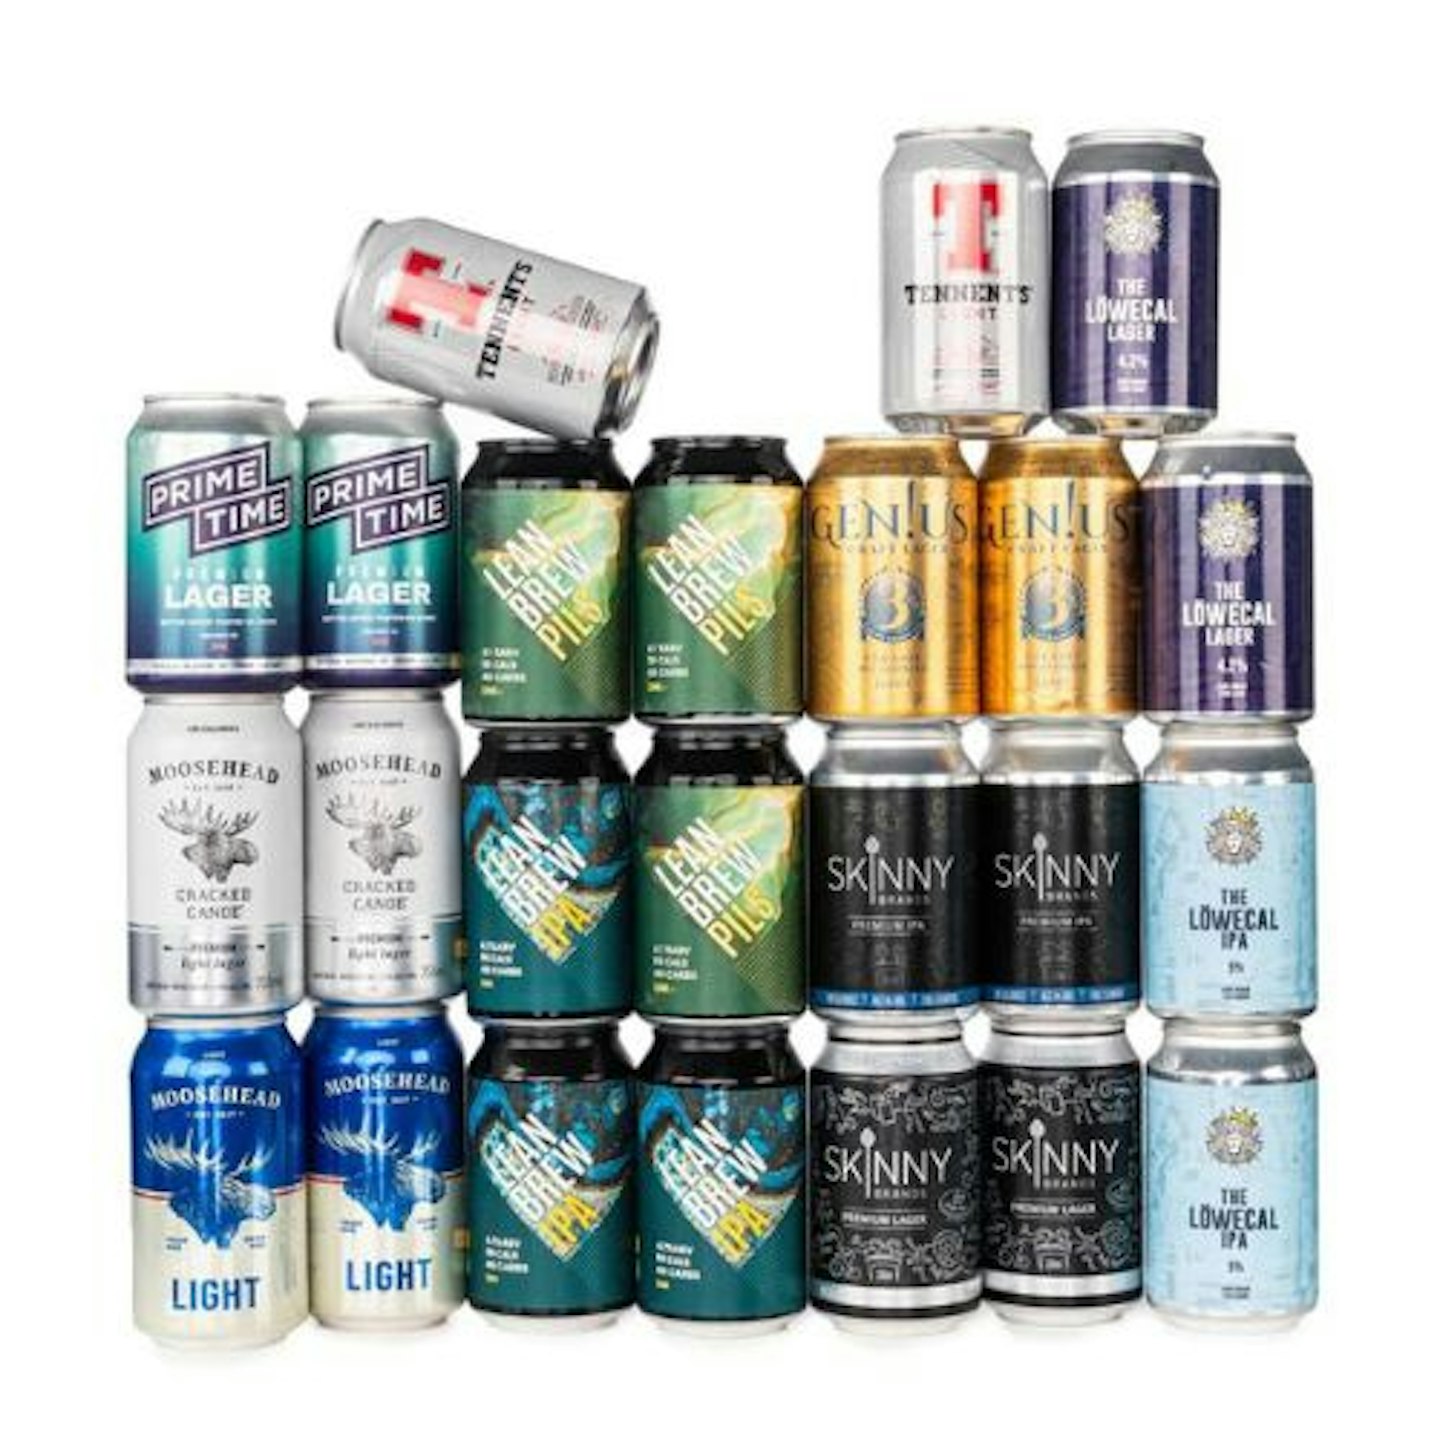 Mixed Low Carb Beer Case 24 Pack